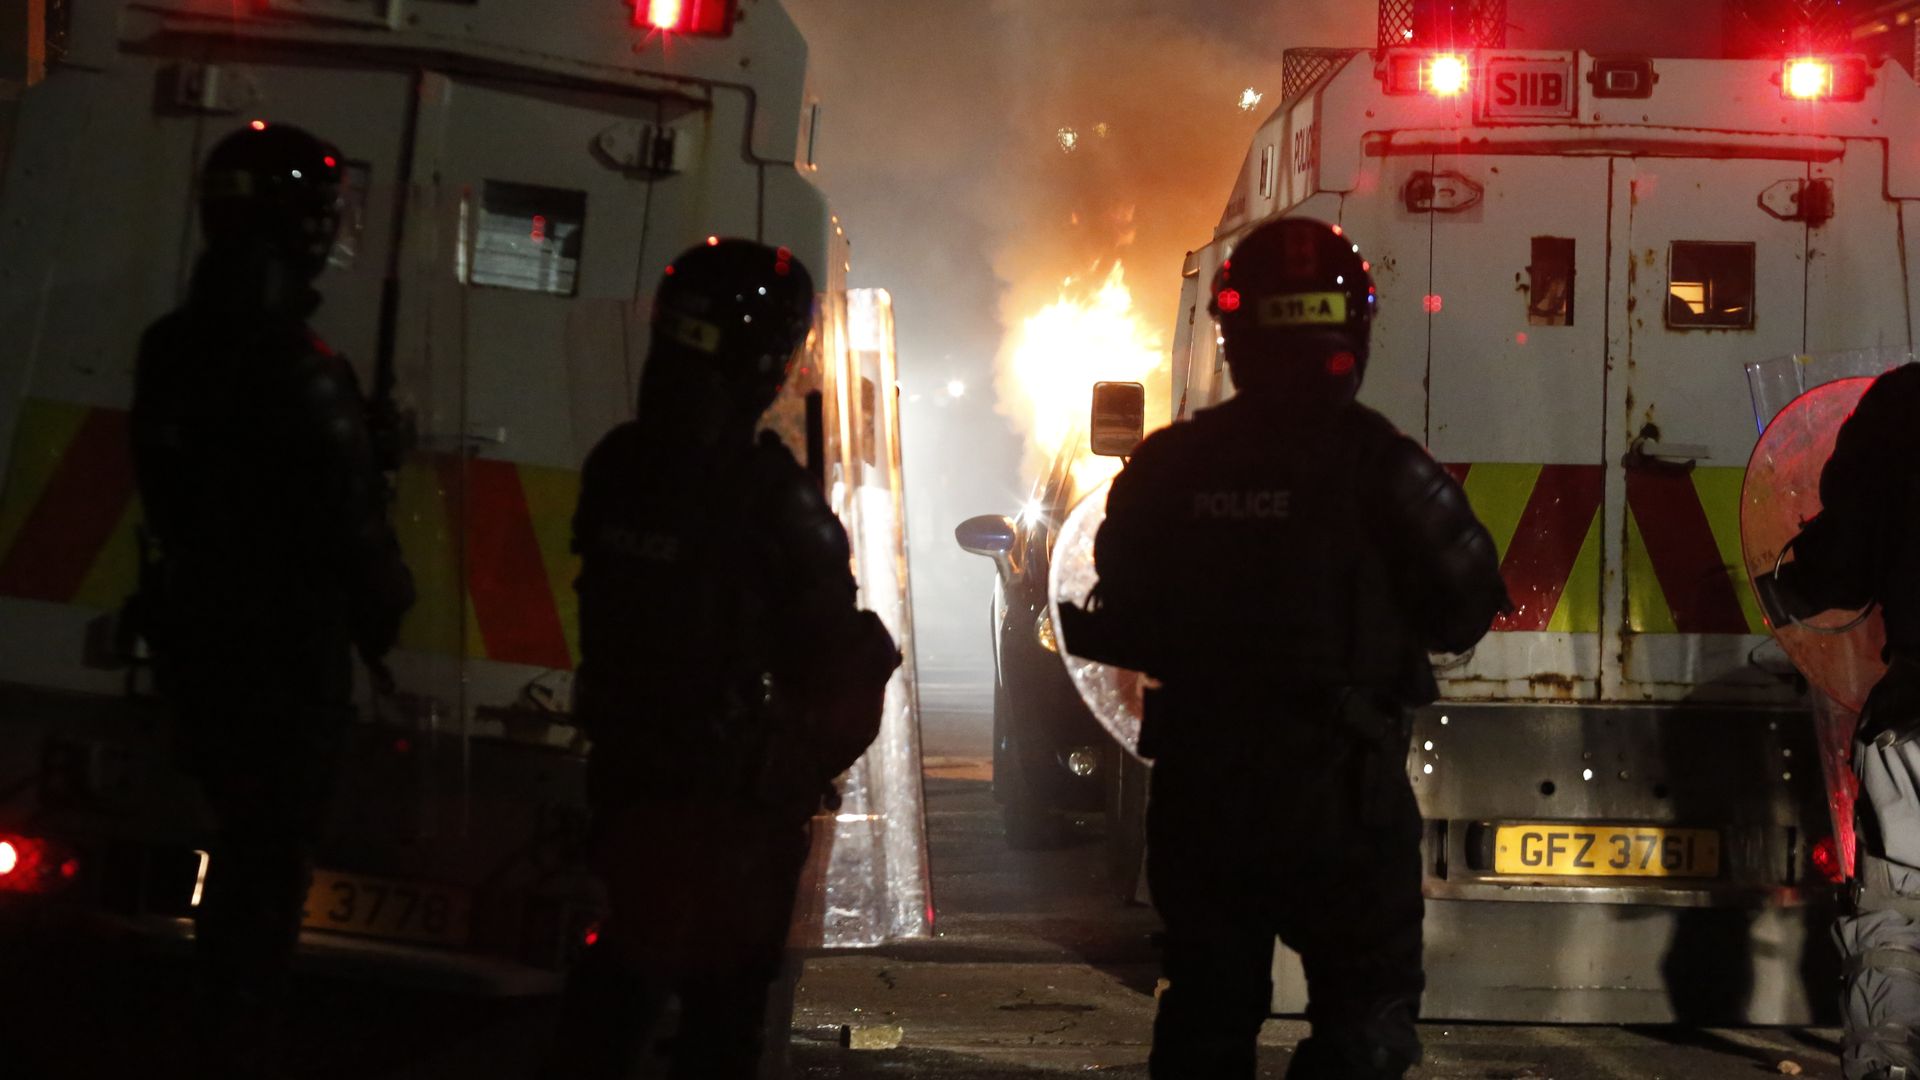 Police before a burning vehicle in Belfast, Northern Ireland, on April 9.